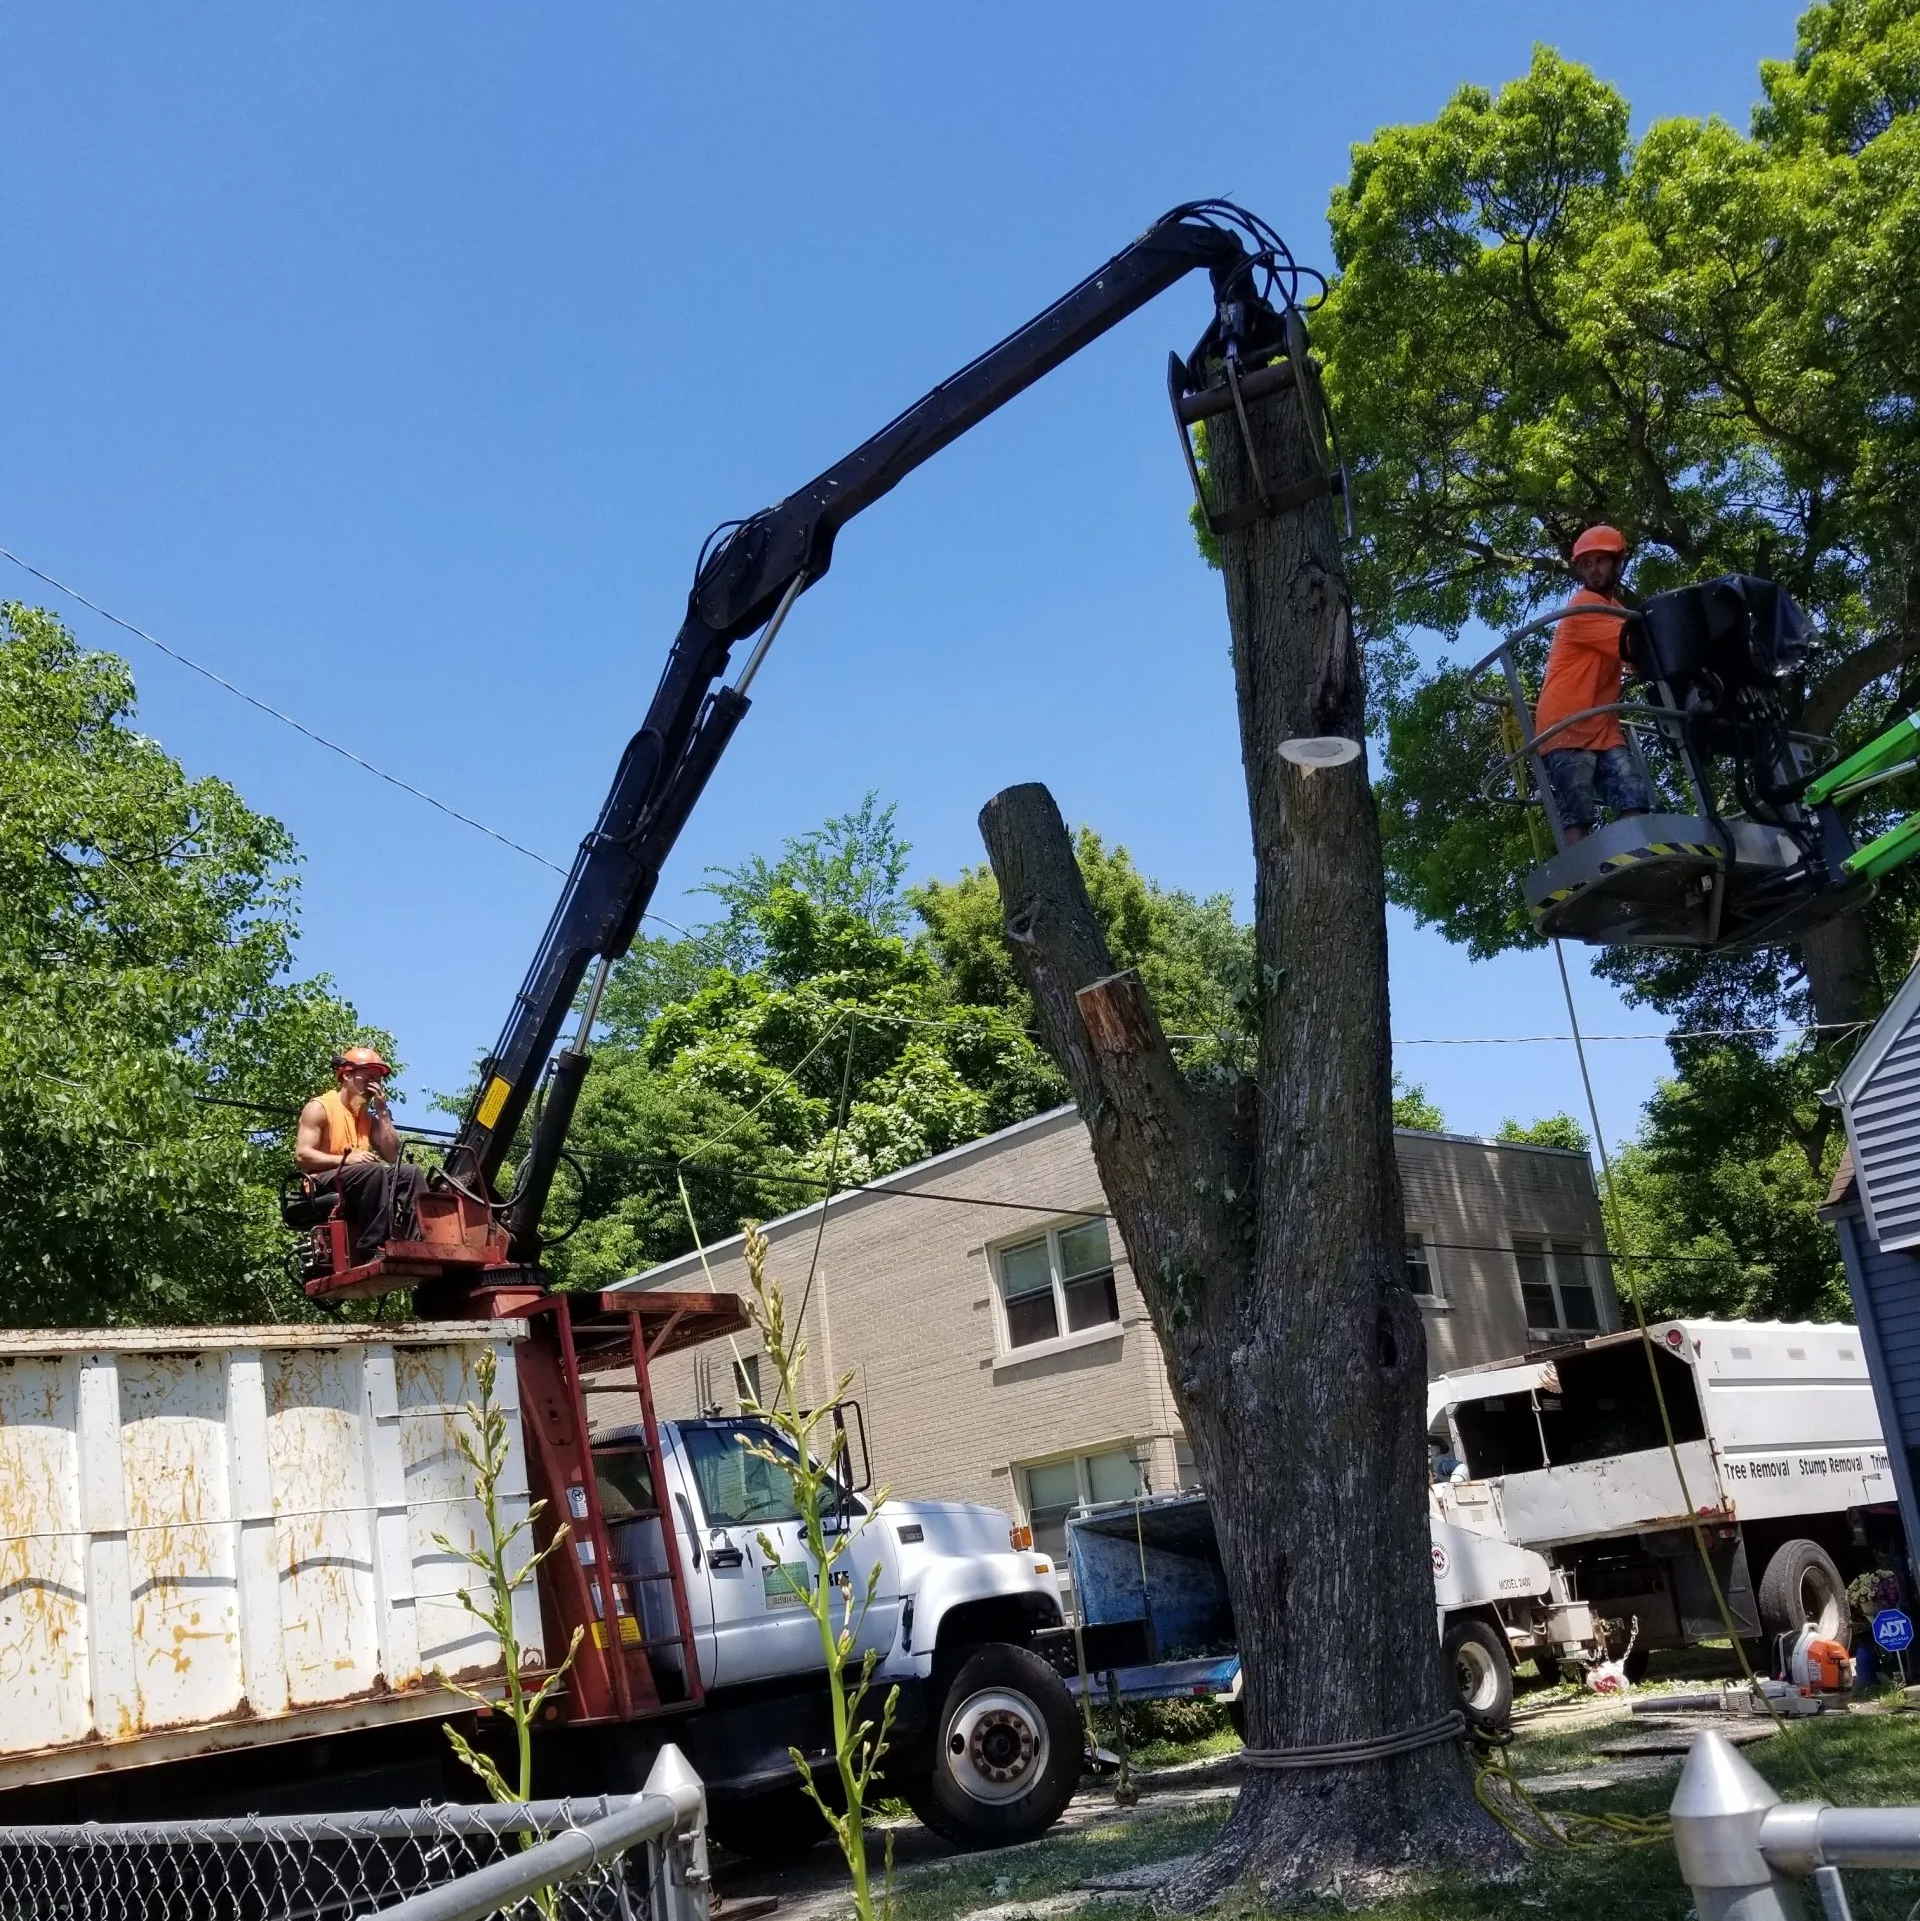 Tree Removal Experts